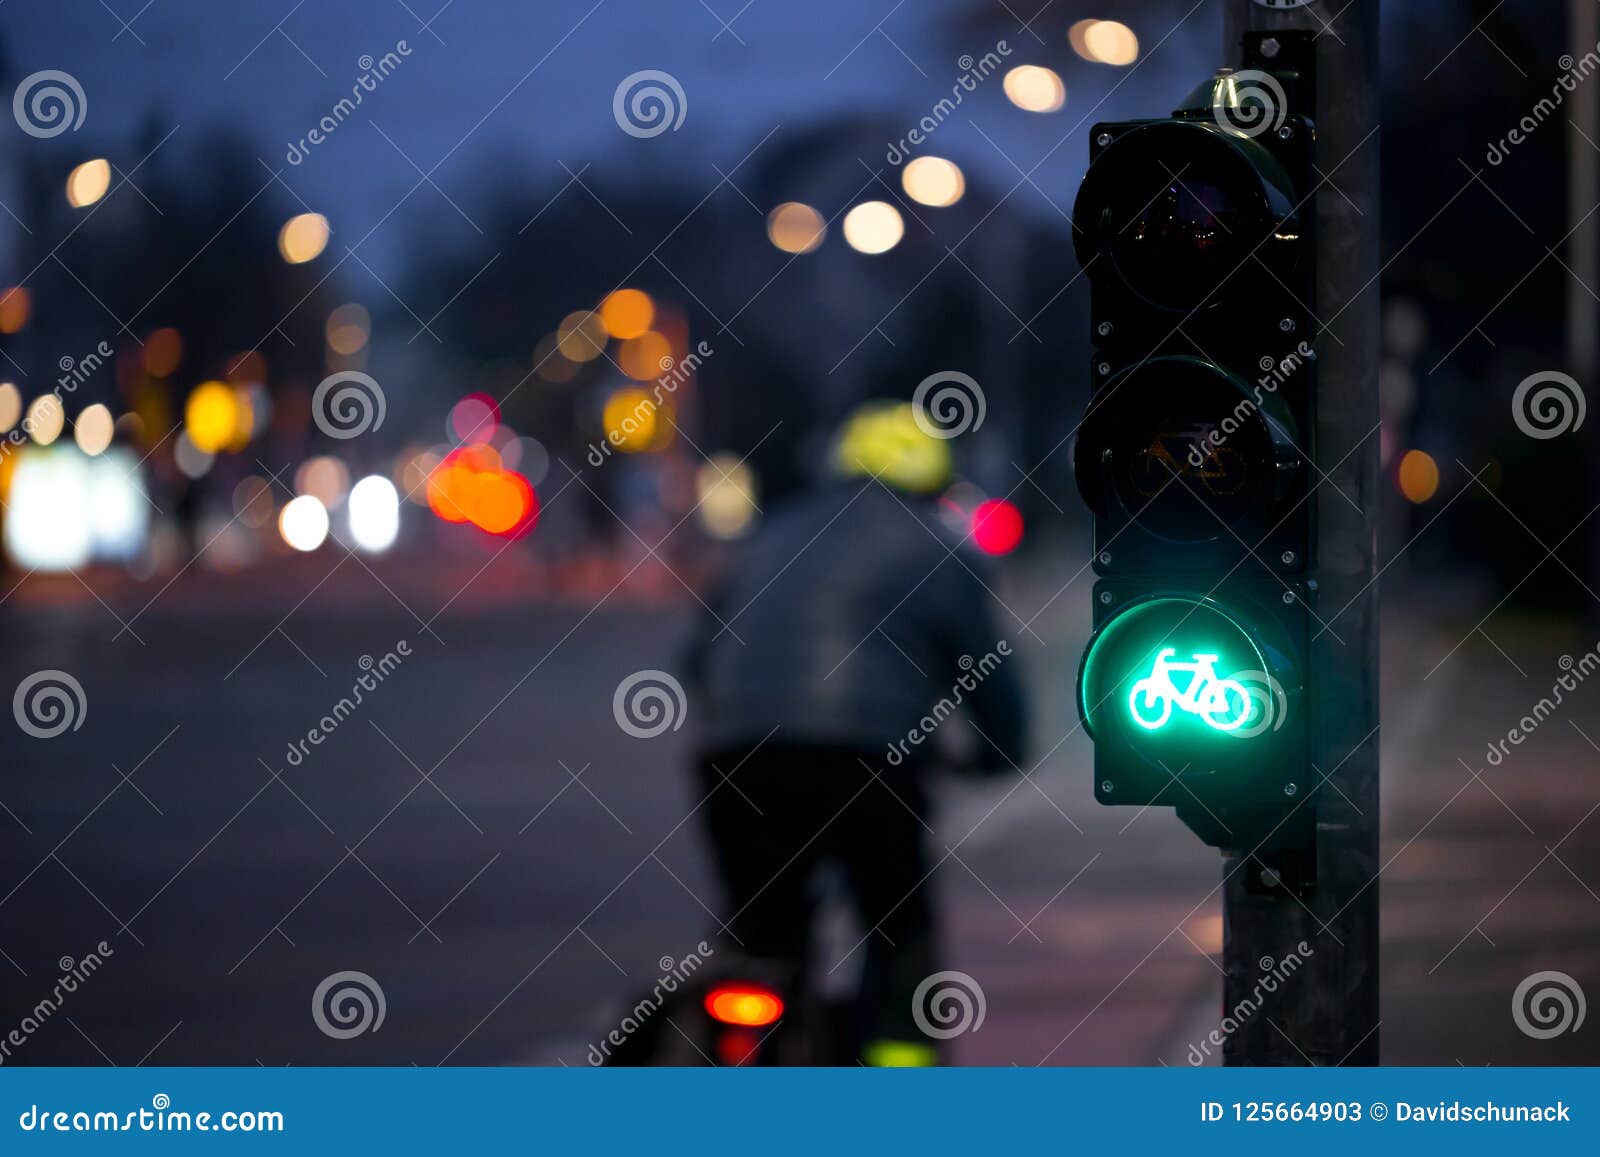 cyclist passes bicycle traffic light